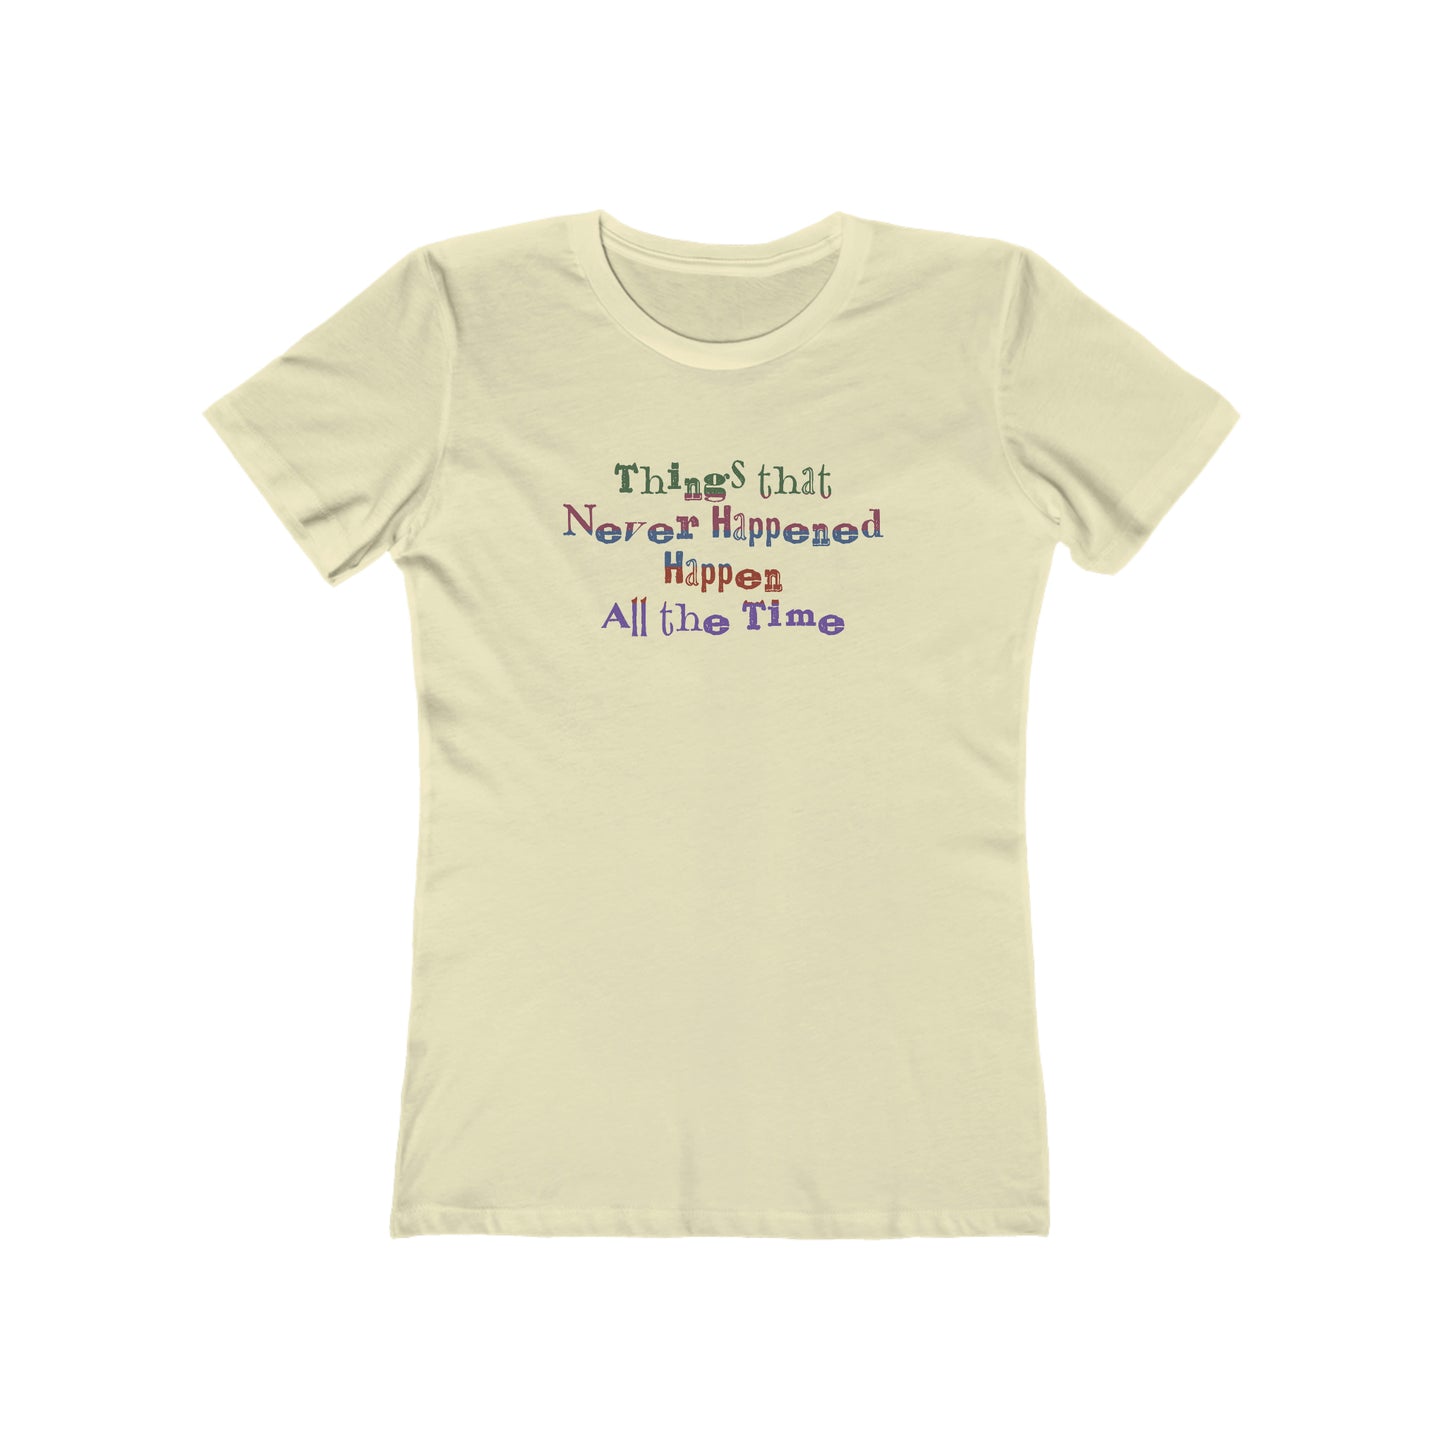 Things that Never Happened Happen All the Time - Women's T-Shirt